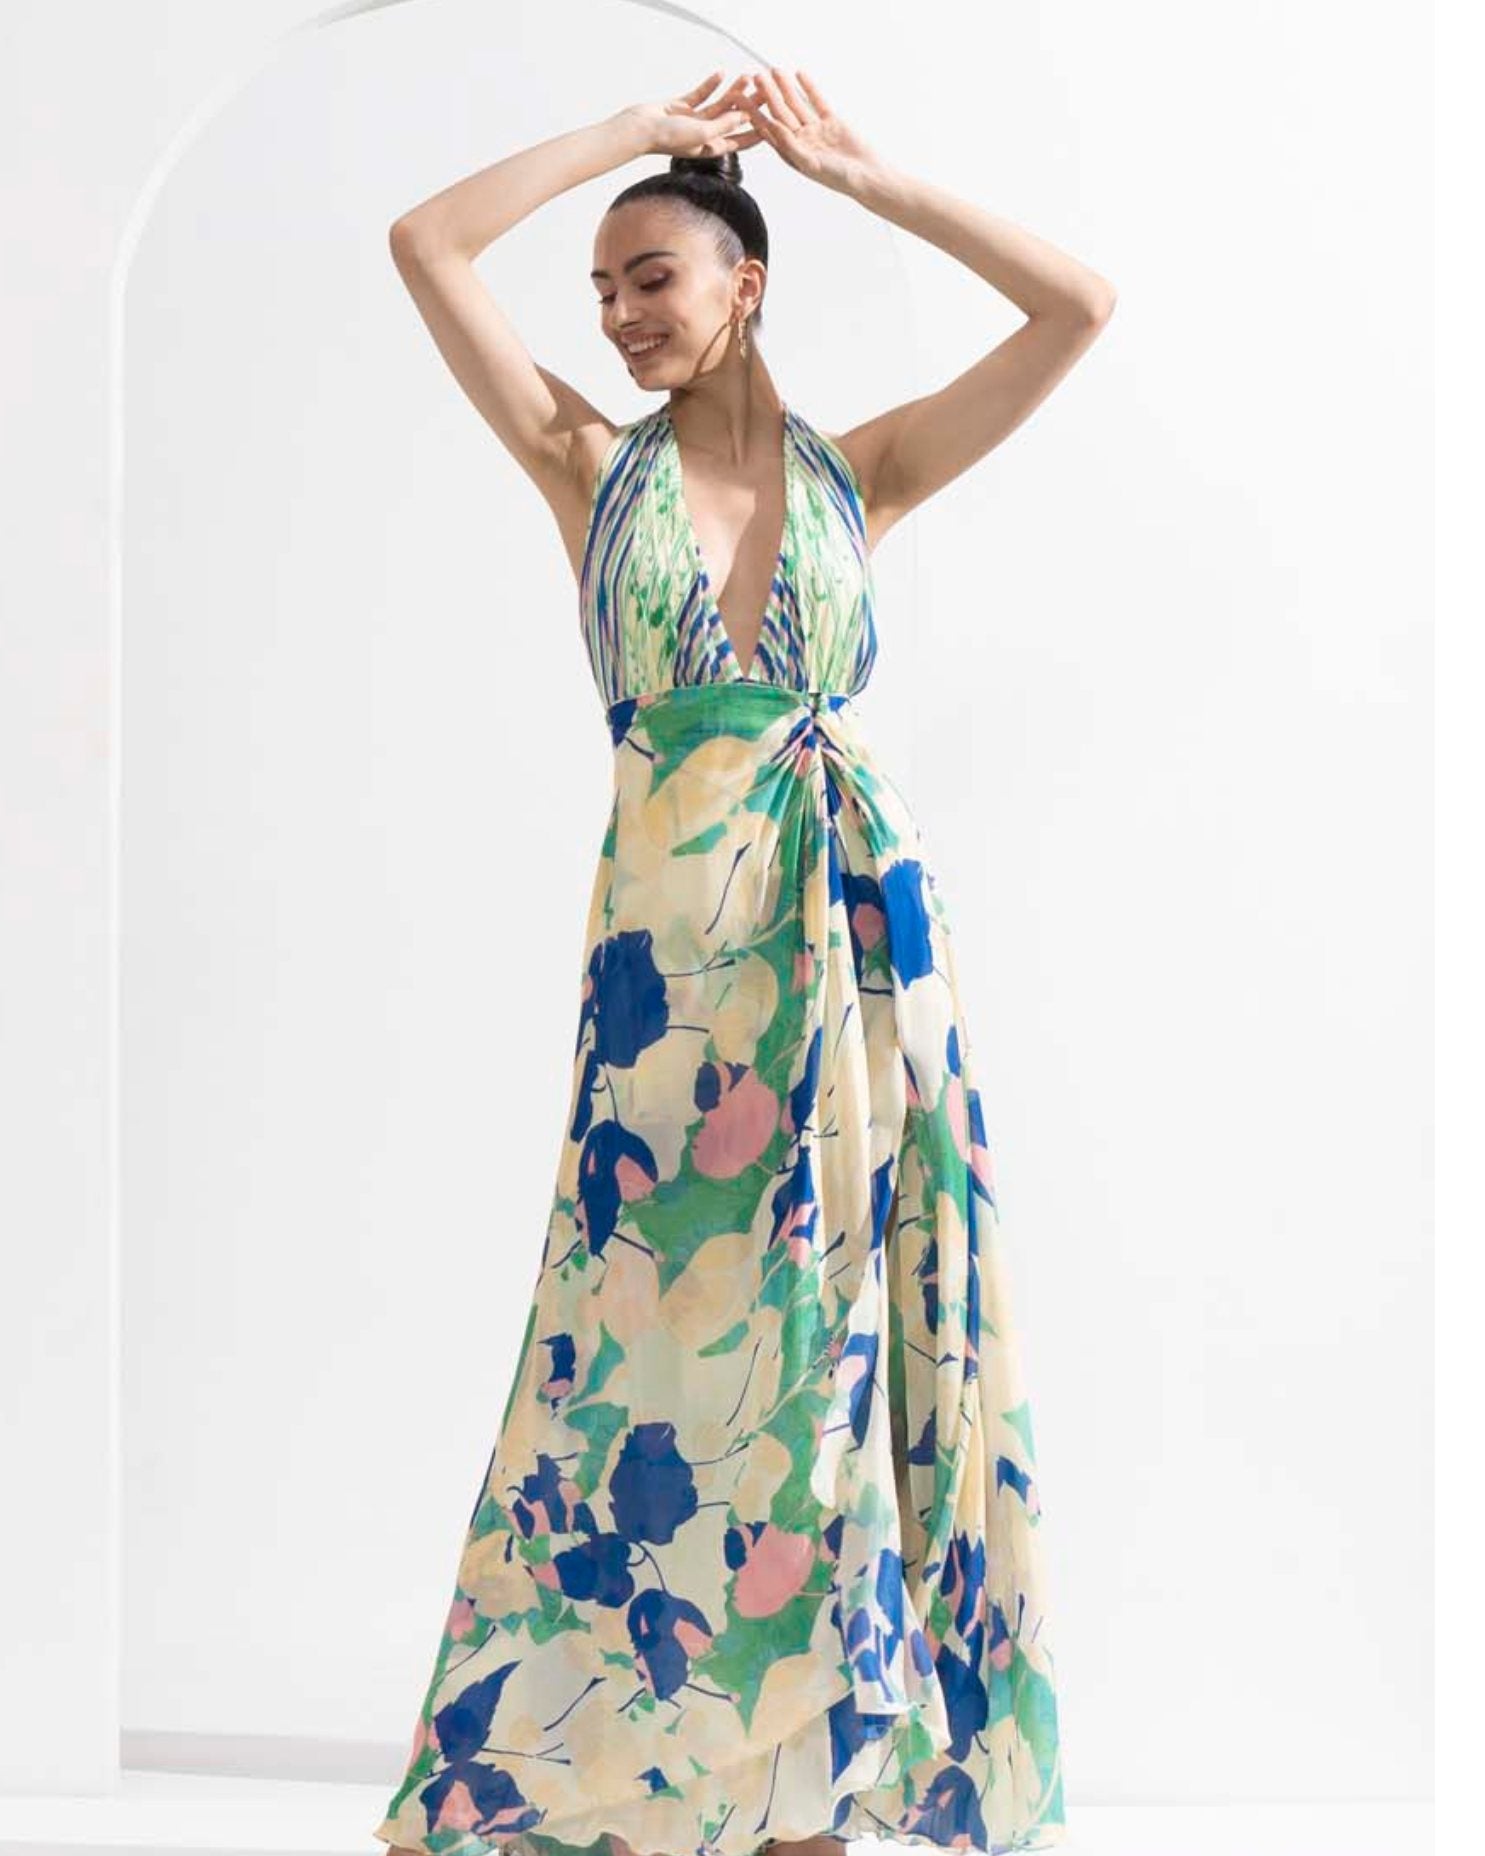 Mystic green chiffon placement printed draped halter neck dress with a silver accessory.